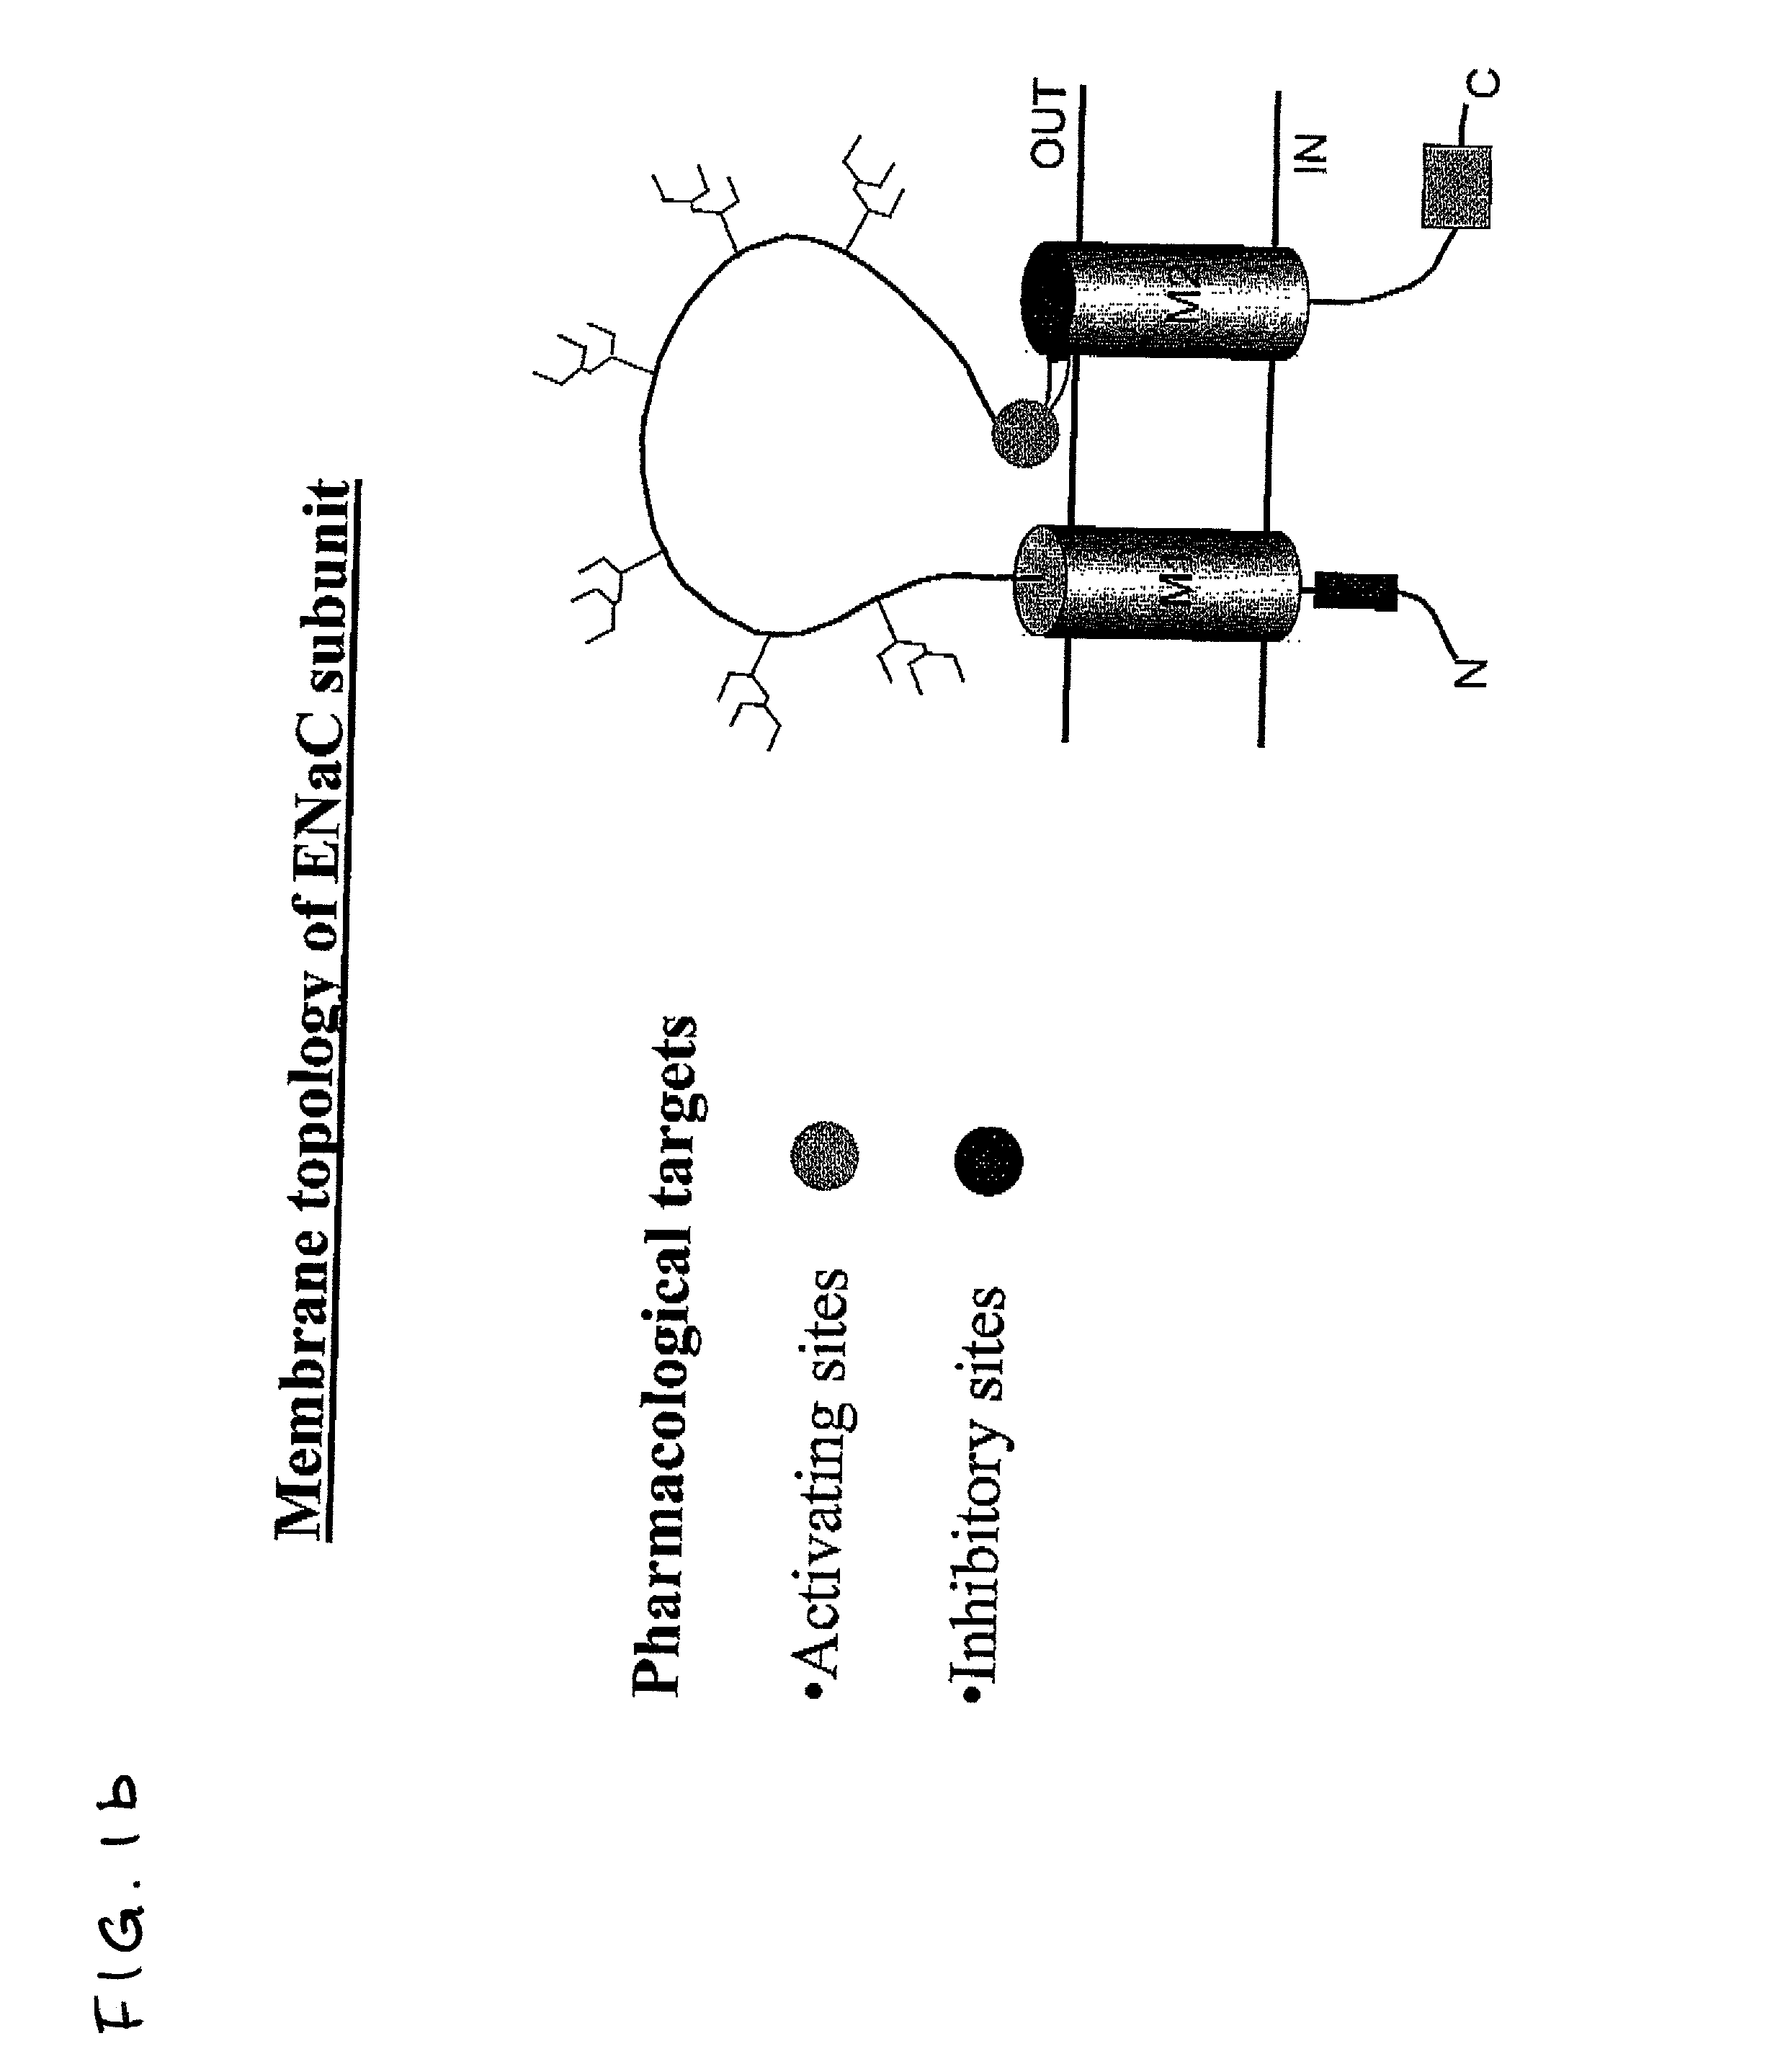 Methods of identifying inhibitory compounds and uses thereof